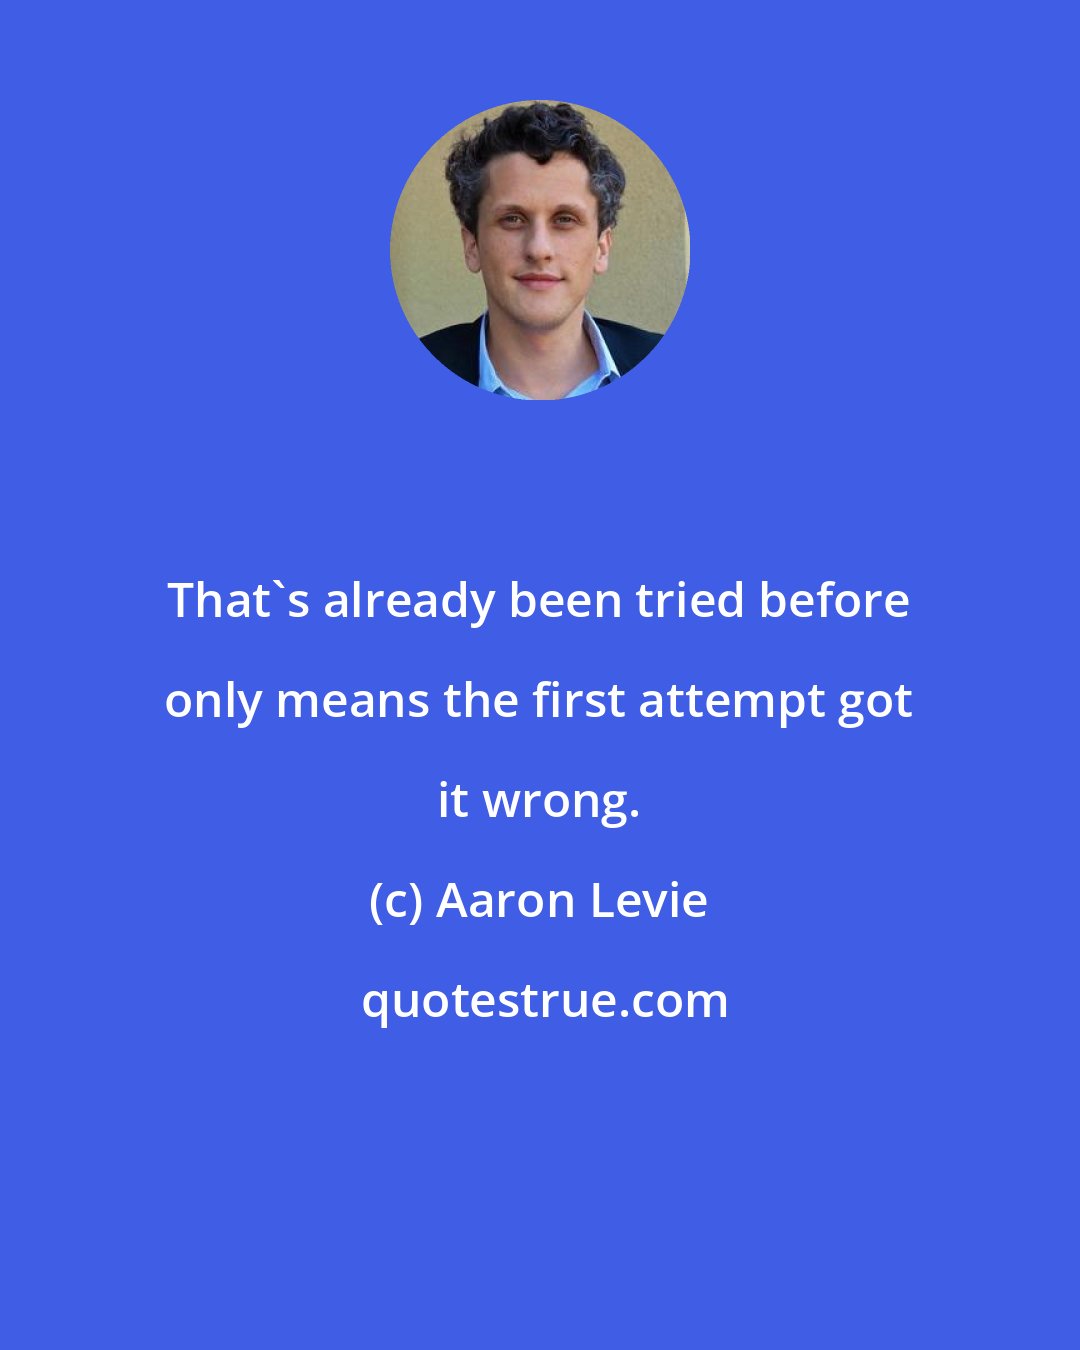 Aaron Levie: That's already been tried before only means the first attempt got it wrong.